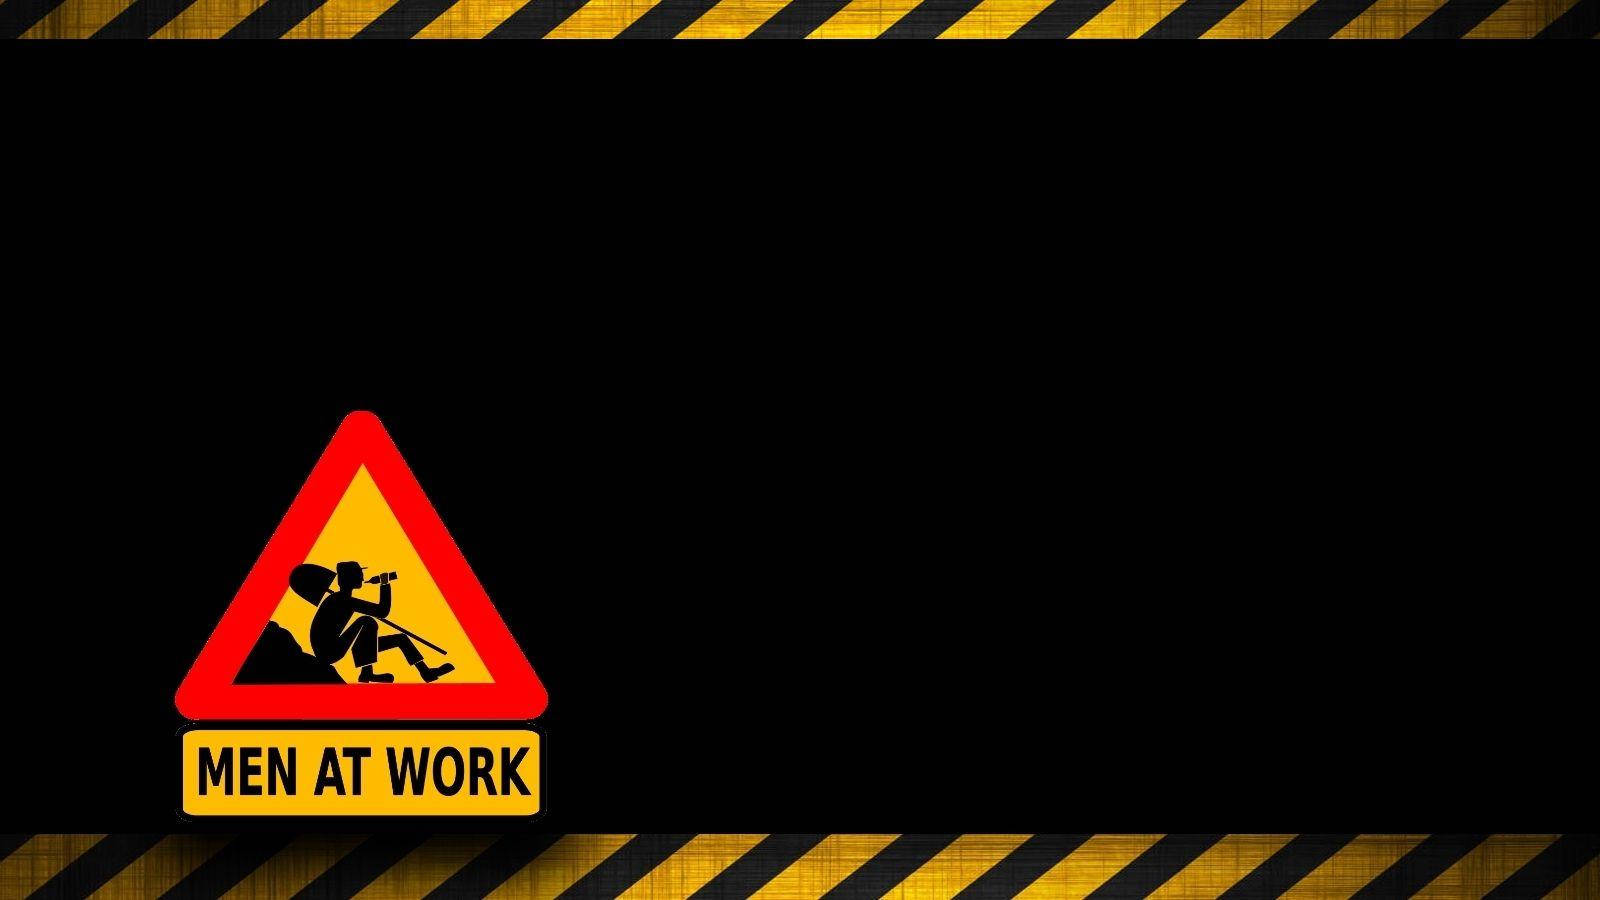 Men At Work Caution For Construction Background